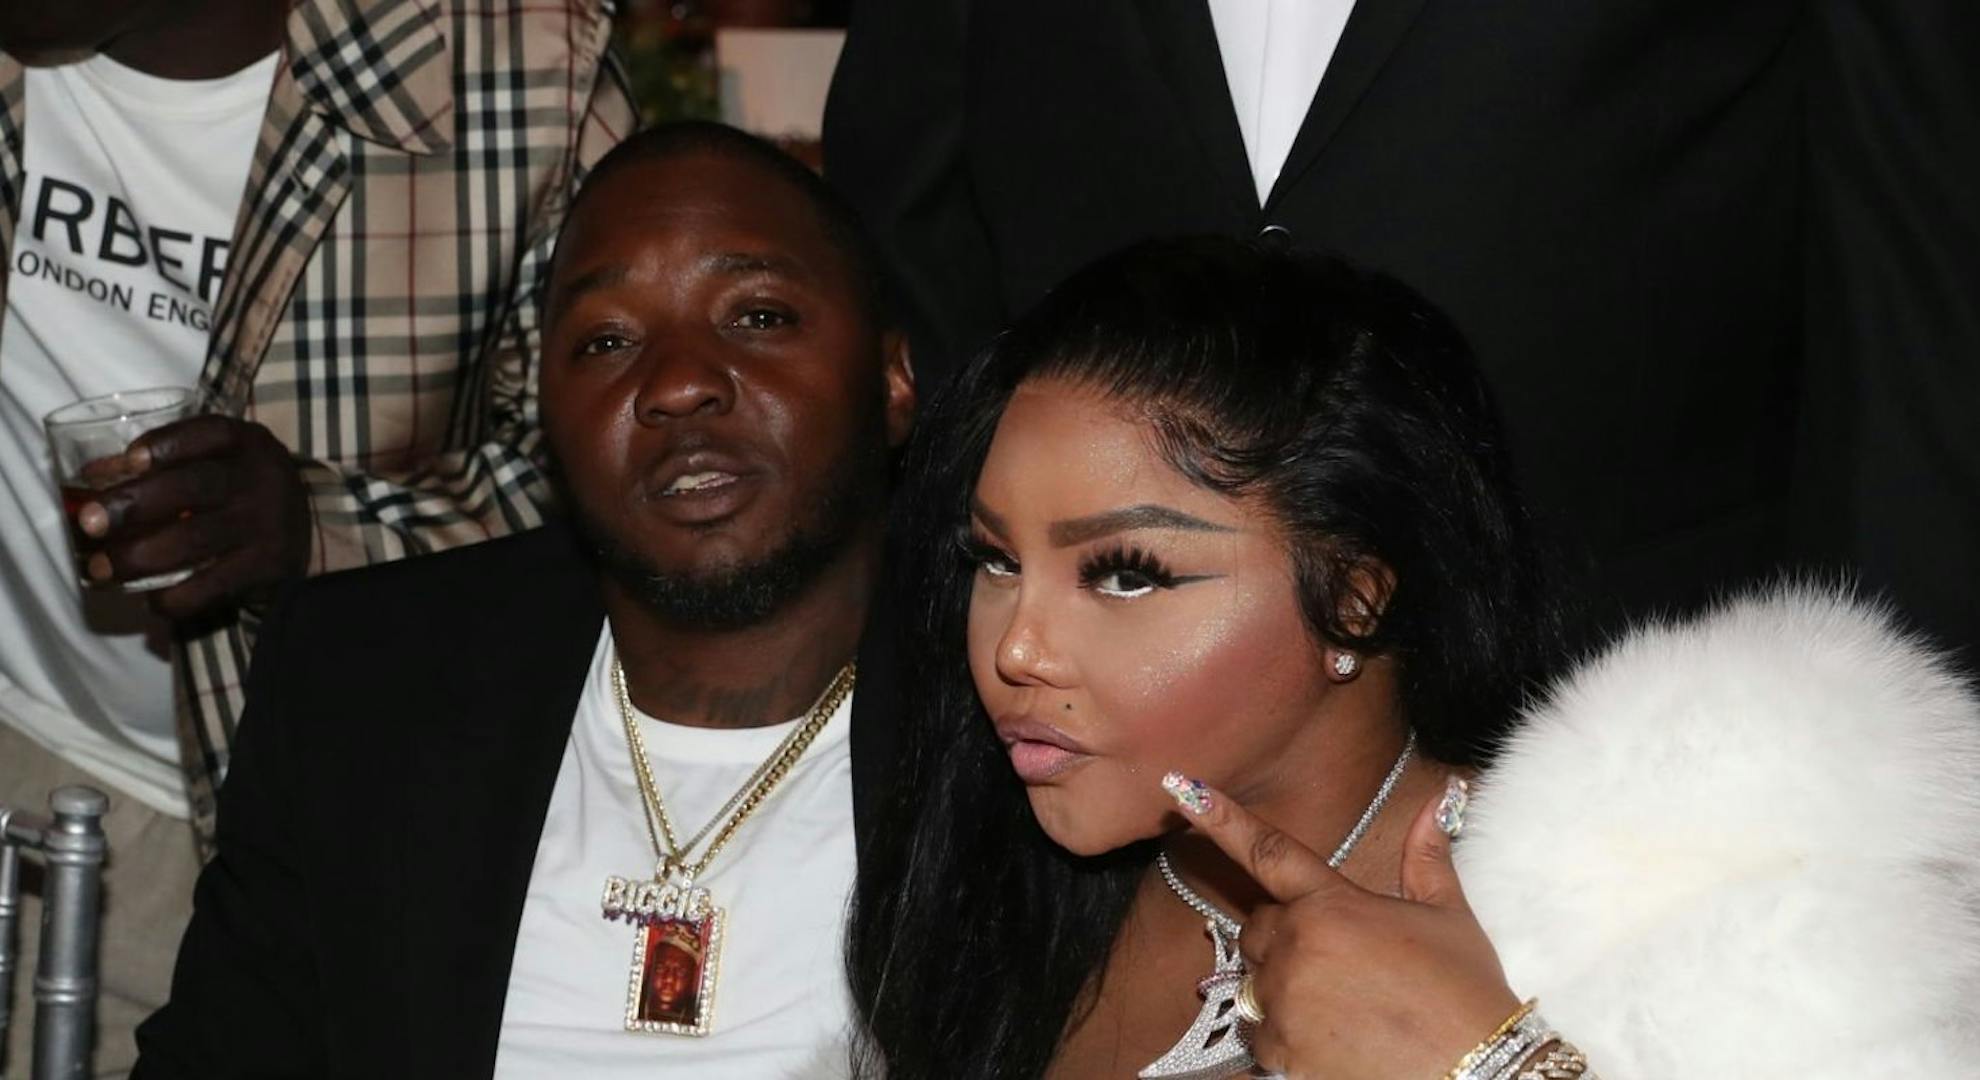  Lil' Cease and Lil' Kim attend the CJ Wallace & Lexus Celebrate Hip-Hop and Honor the Life of Christopher Wallace (a.k.a The Notorious B.I.G) at the Lil' Kim Tribute Gala at Gustavino's on May 20, 2022 in New York City. (Photo by Johnny Nunez/Getty Images for Lexus)